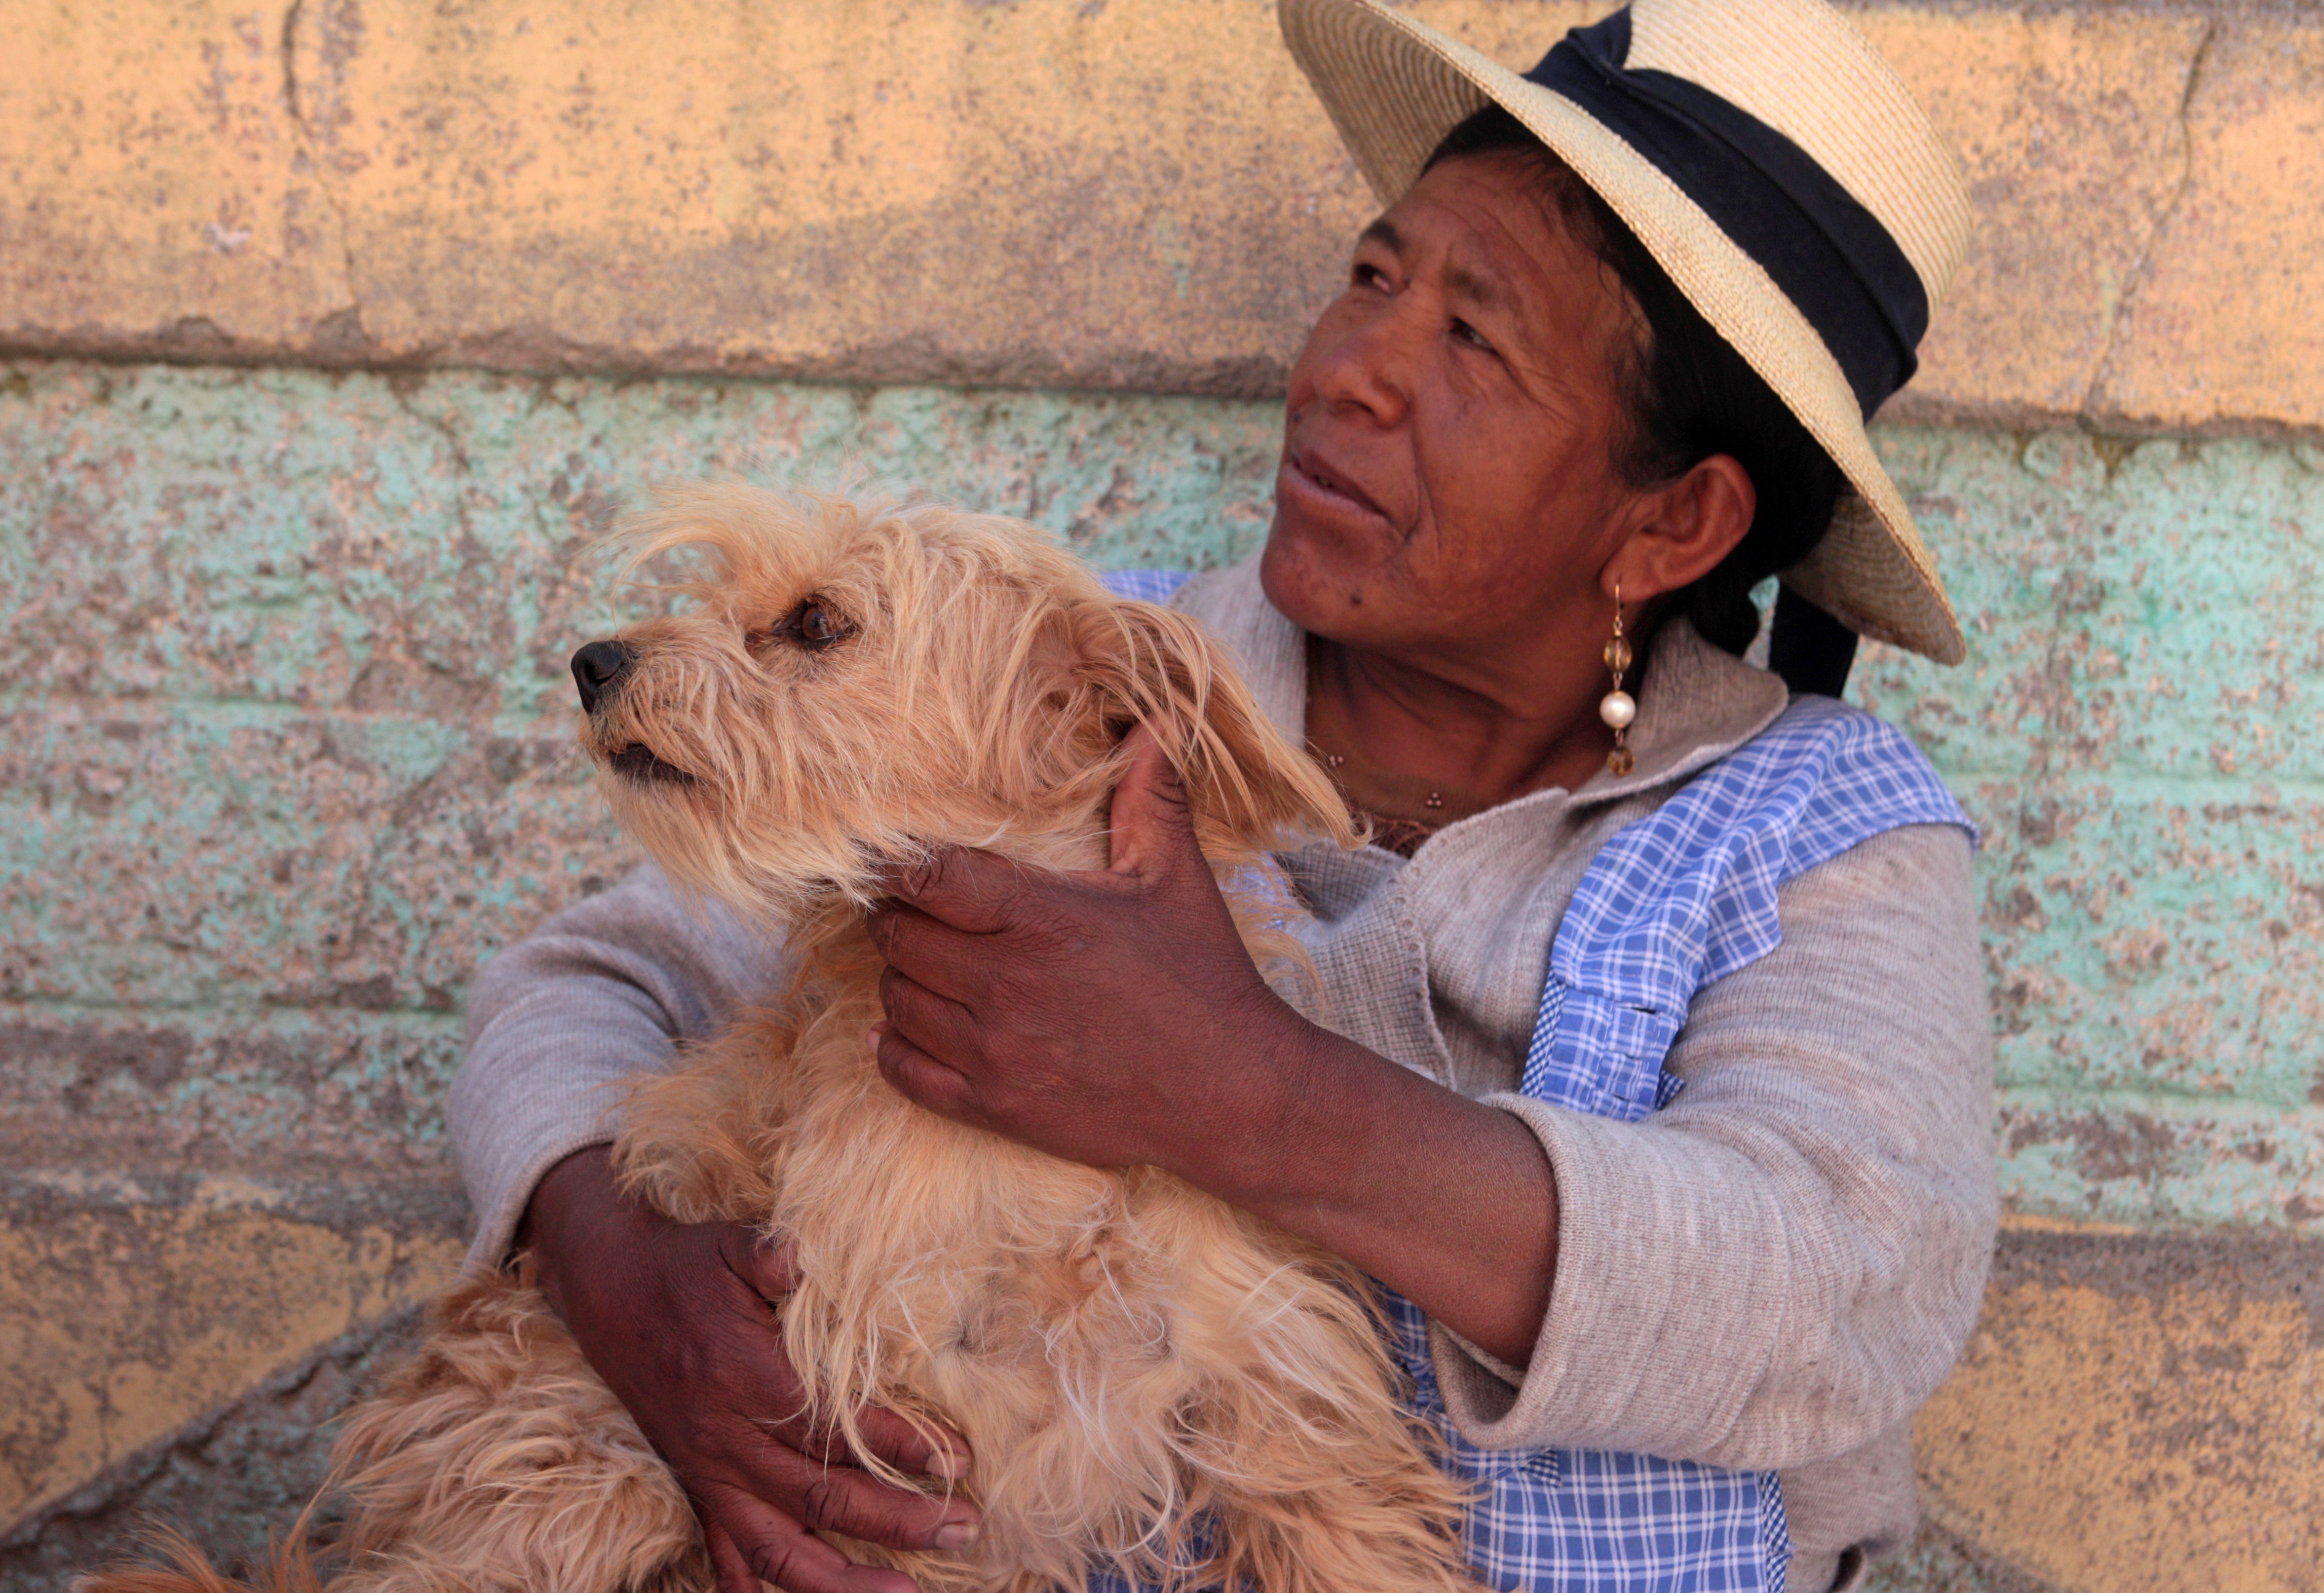 Herlinda and Luna, her dog. Puno, Perú. World Animal Protection has been giving a workshop to local school teachers on dog bite prevention.